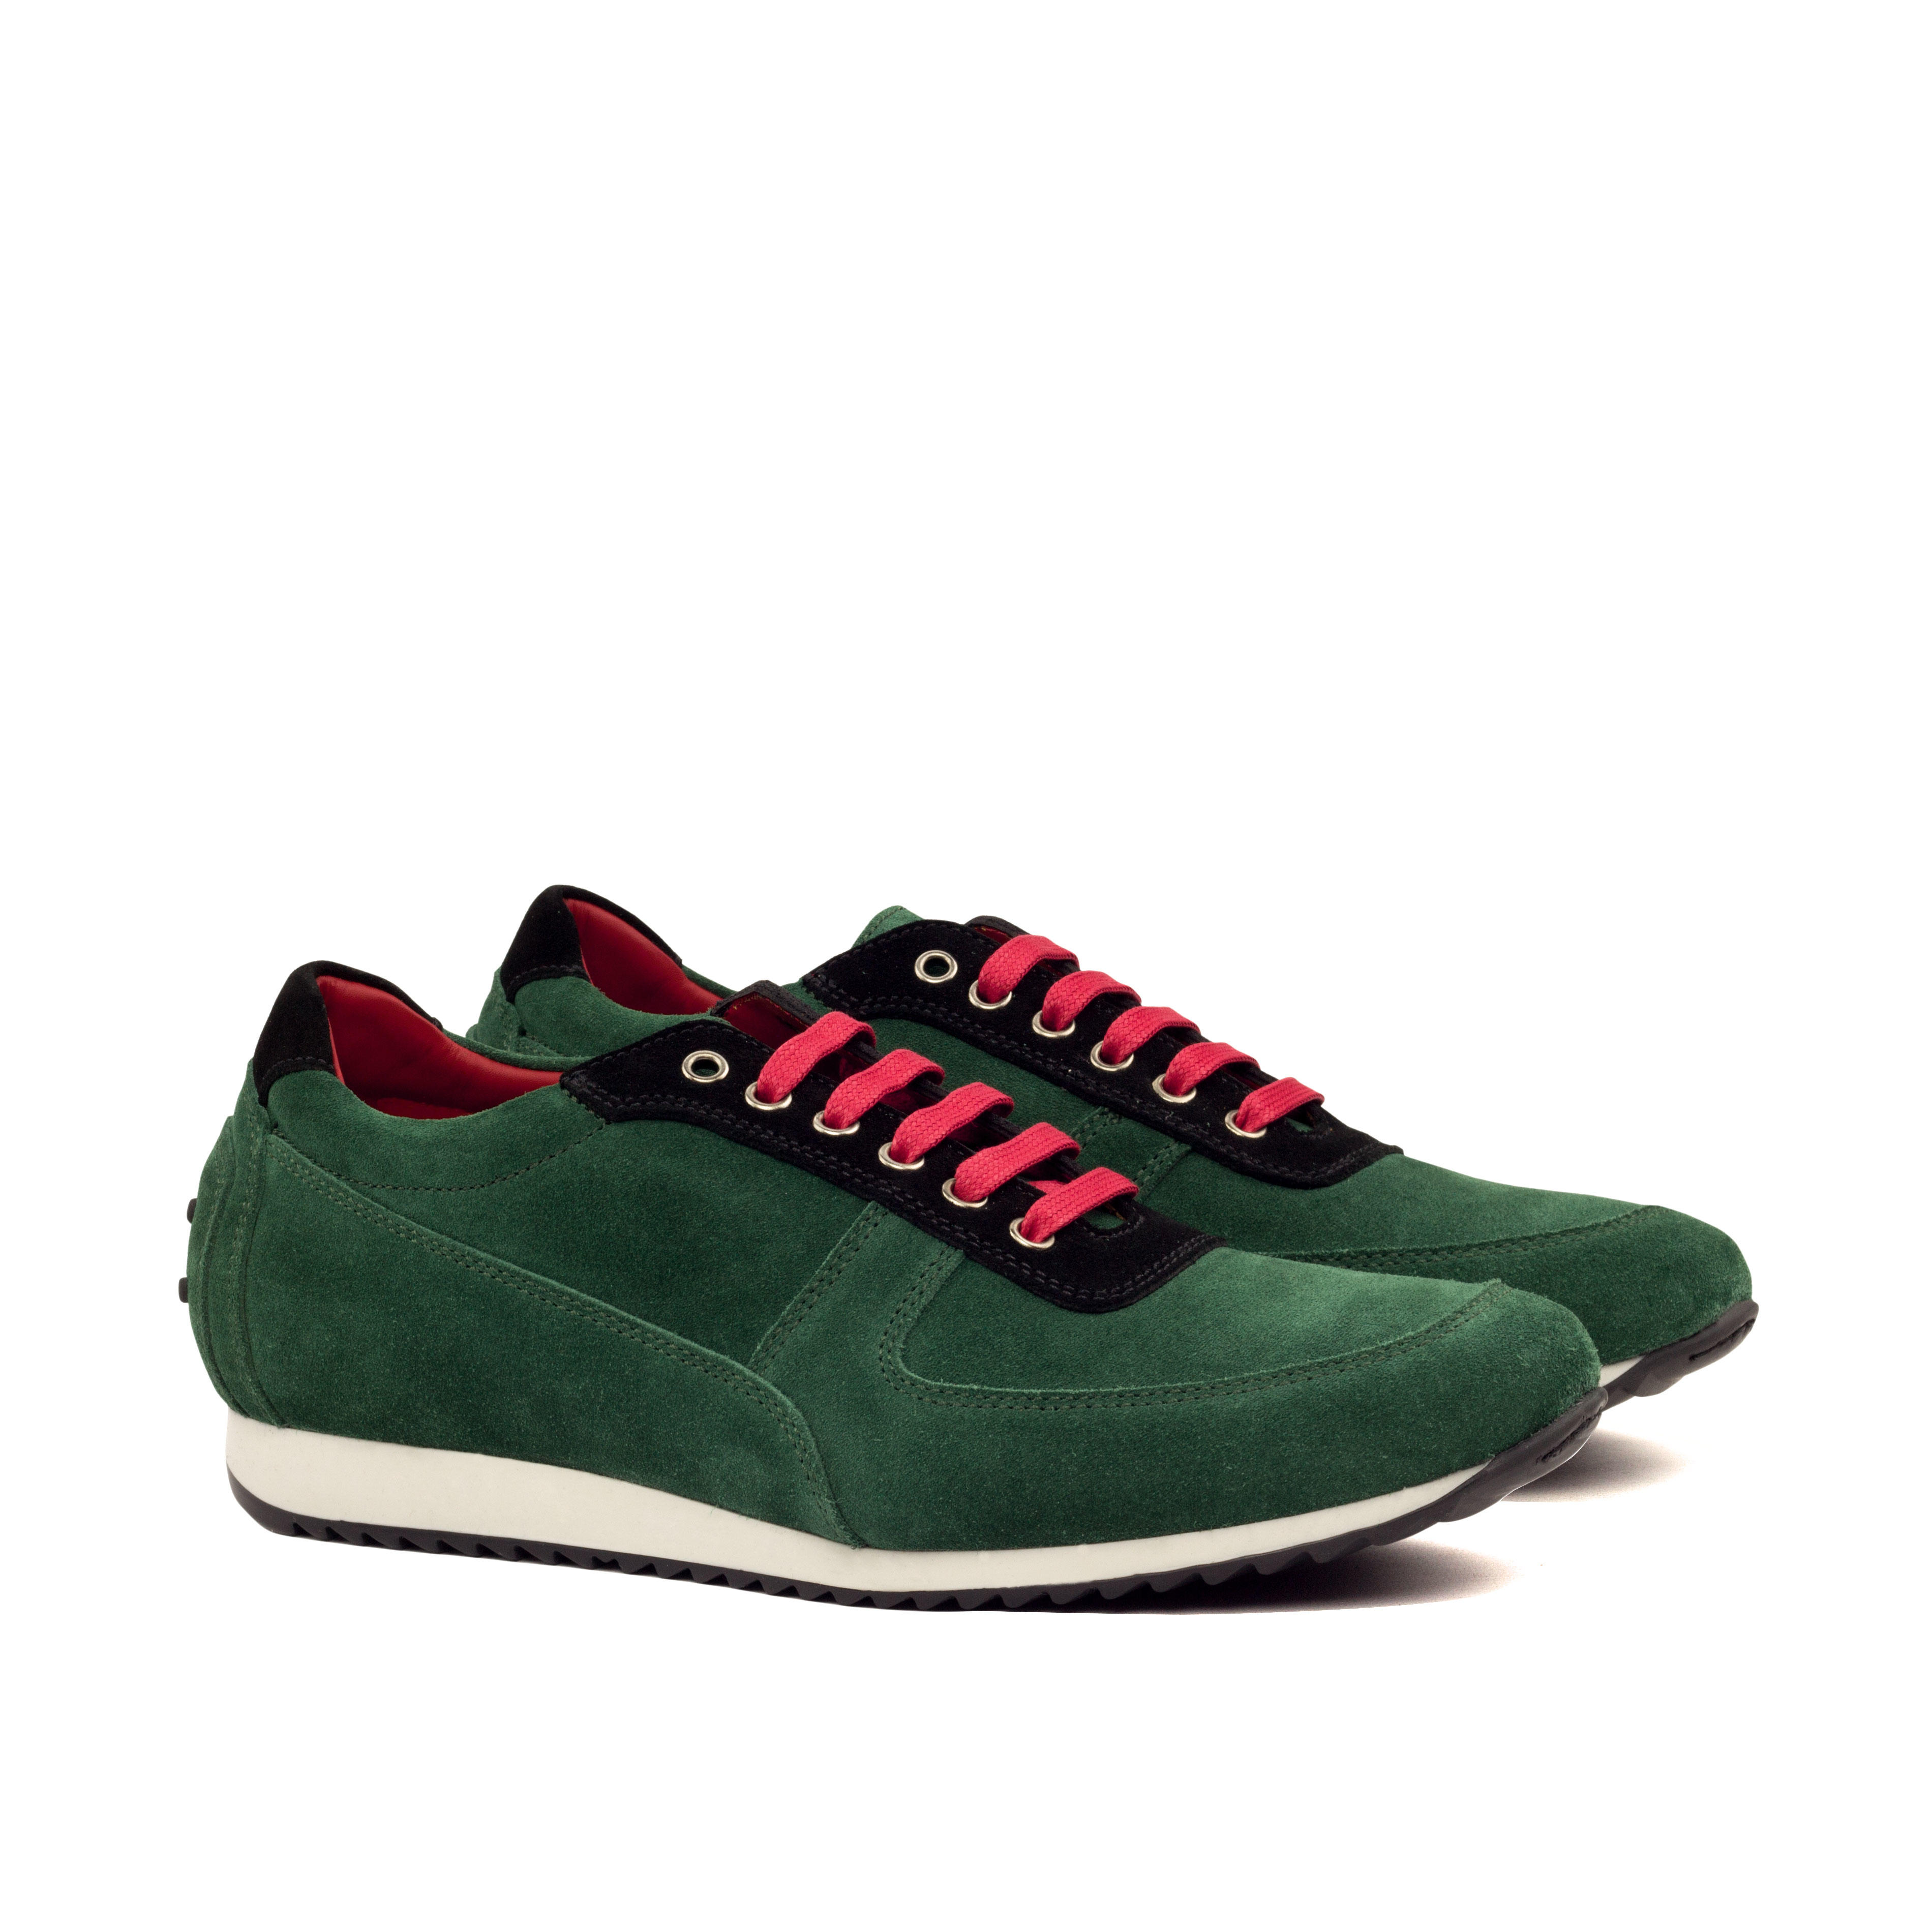 MANOR OF LONDON 'The Runner' Green & Black Suede Trainer Luxury Custom Initials Monogrammed Front Side View